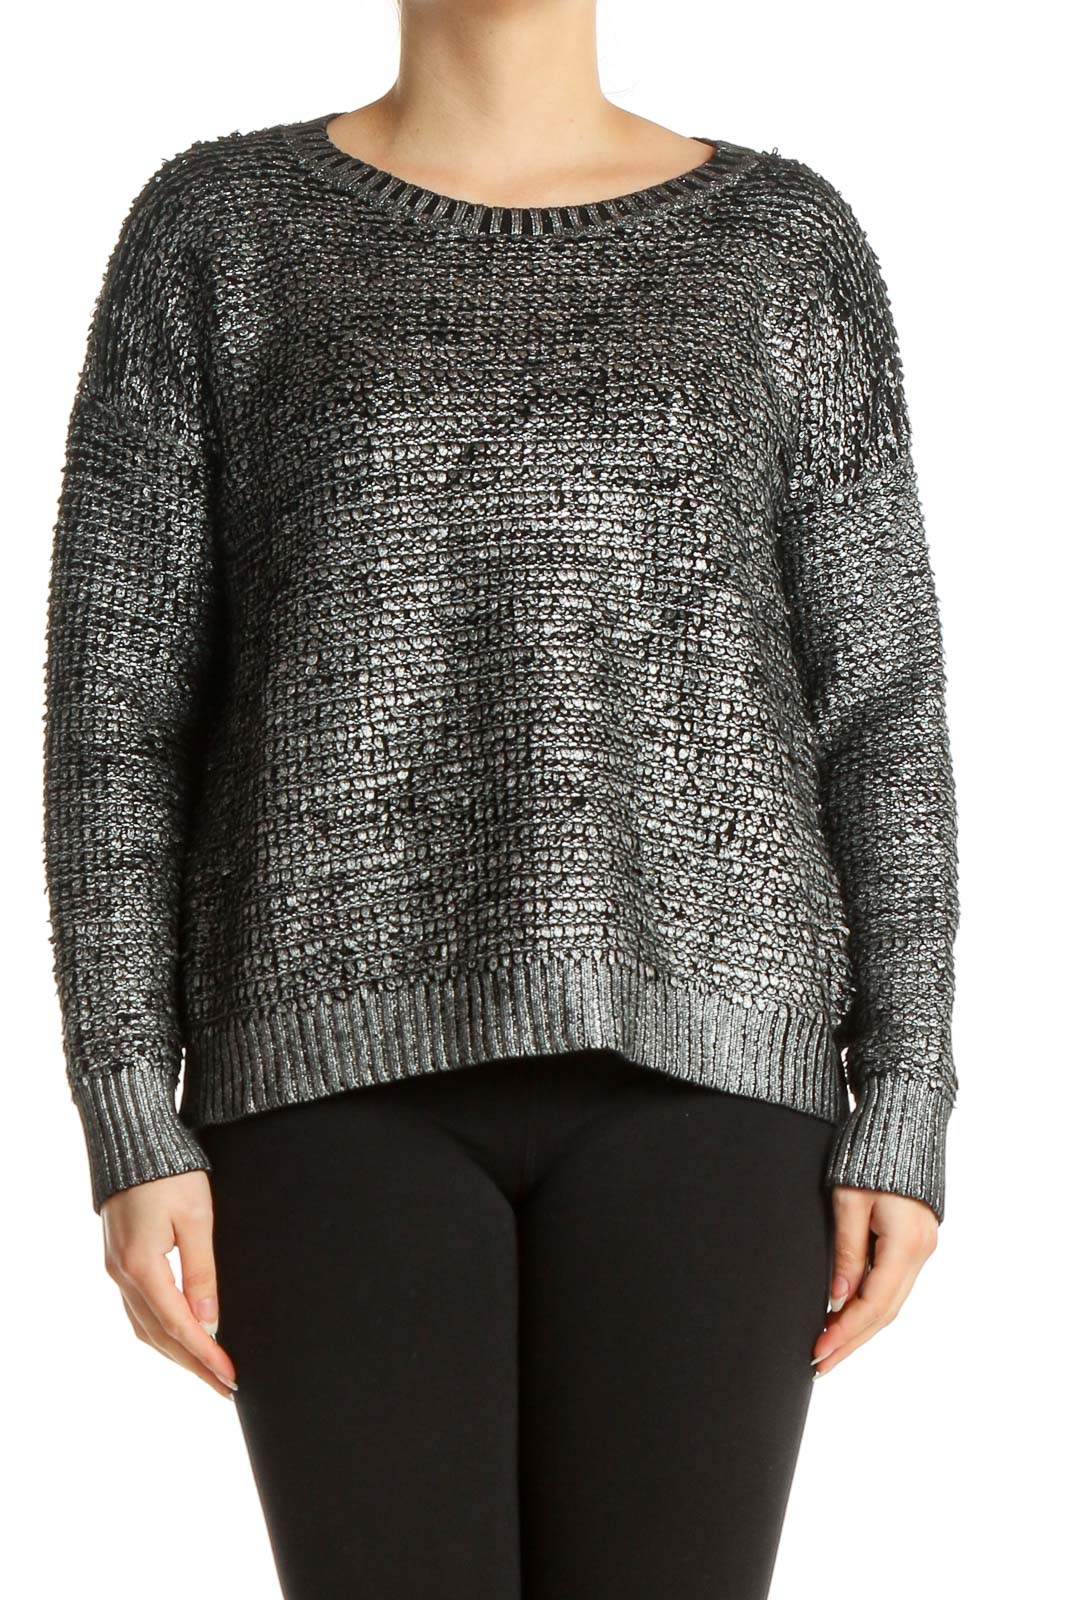 Gray Textured Casual Sweater Front